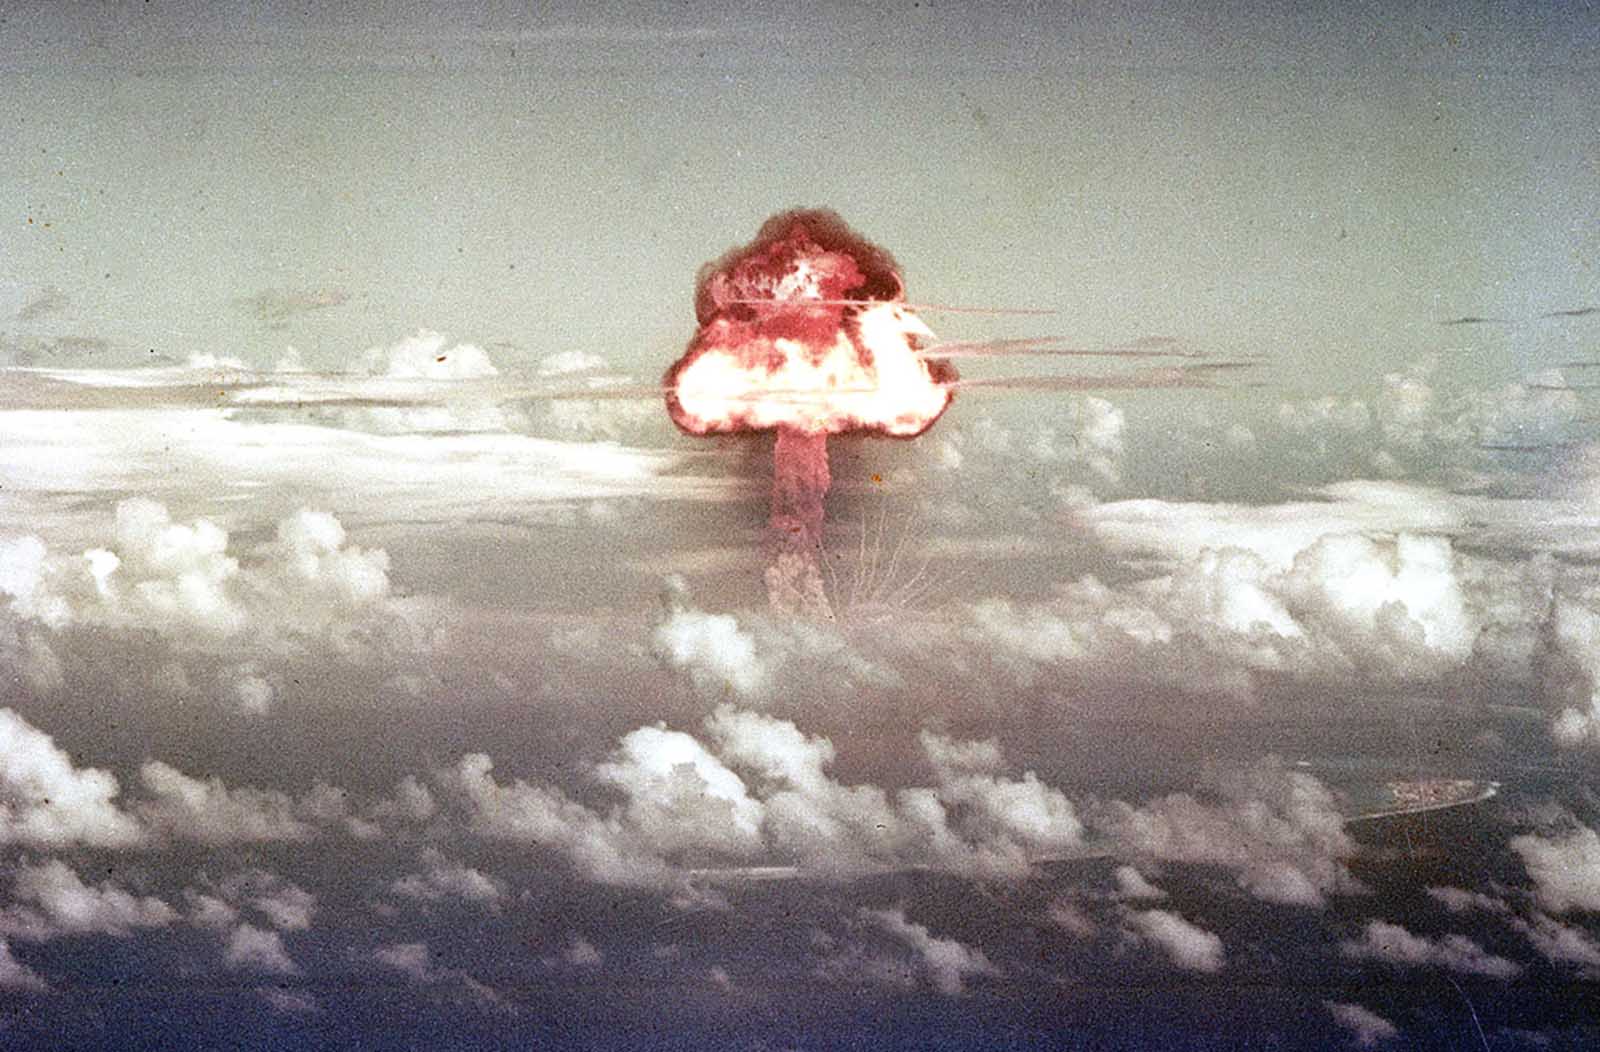 On November 16, 1952, a B-36H bomber dropped a nuclear bomb over a point north of Runit Island in the Enewetak atoll, resulting in a 500-kiloton explosion, as part of a test code-named Ivy.